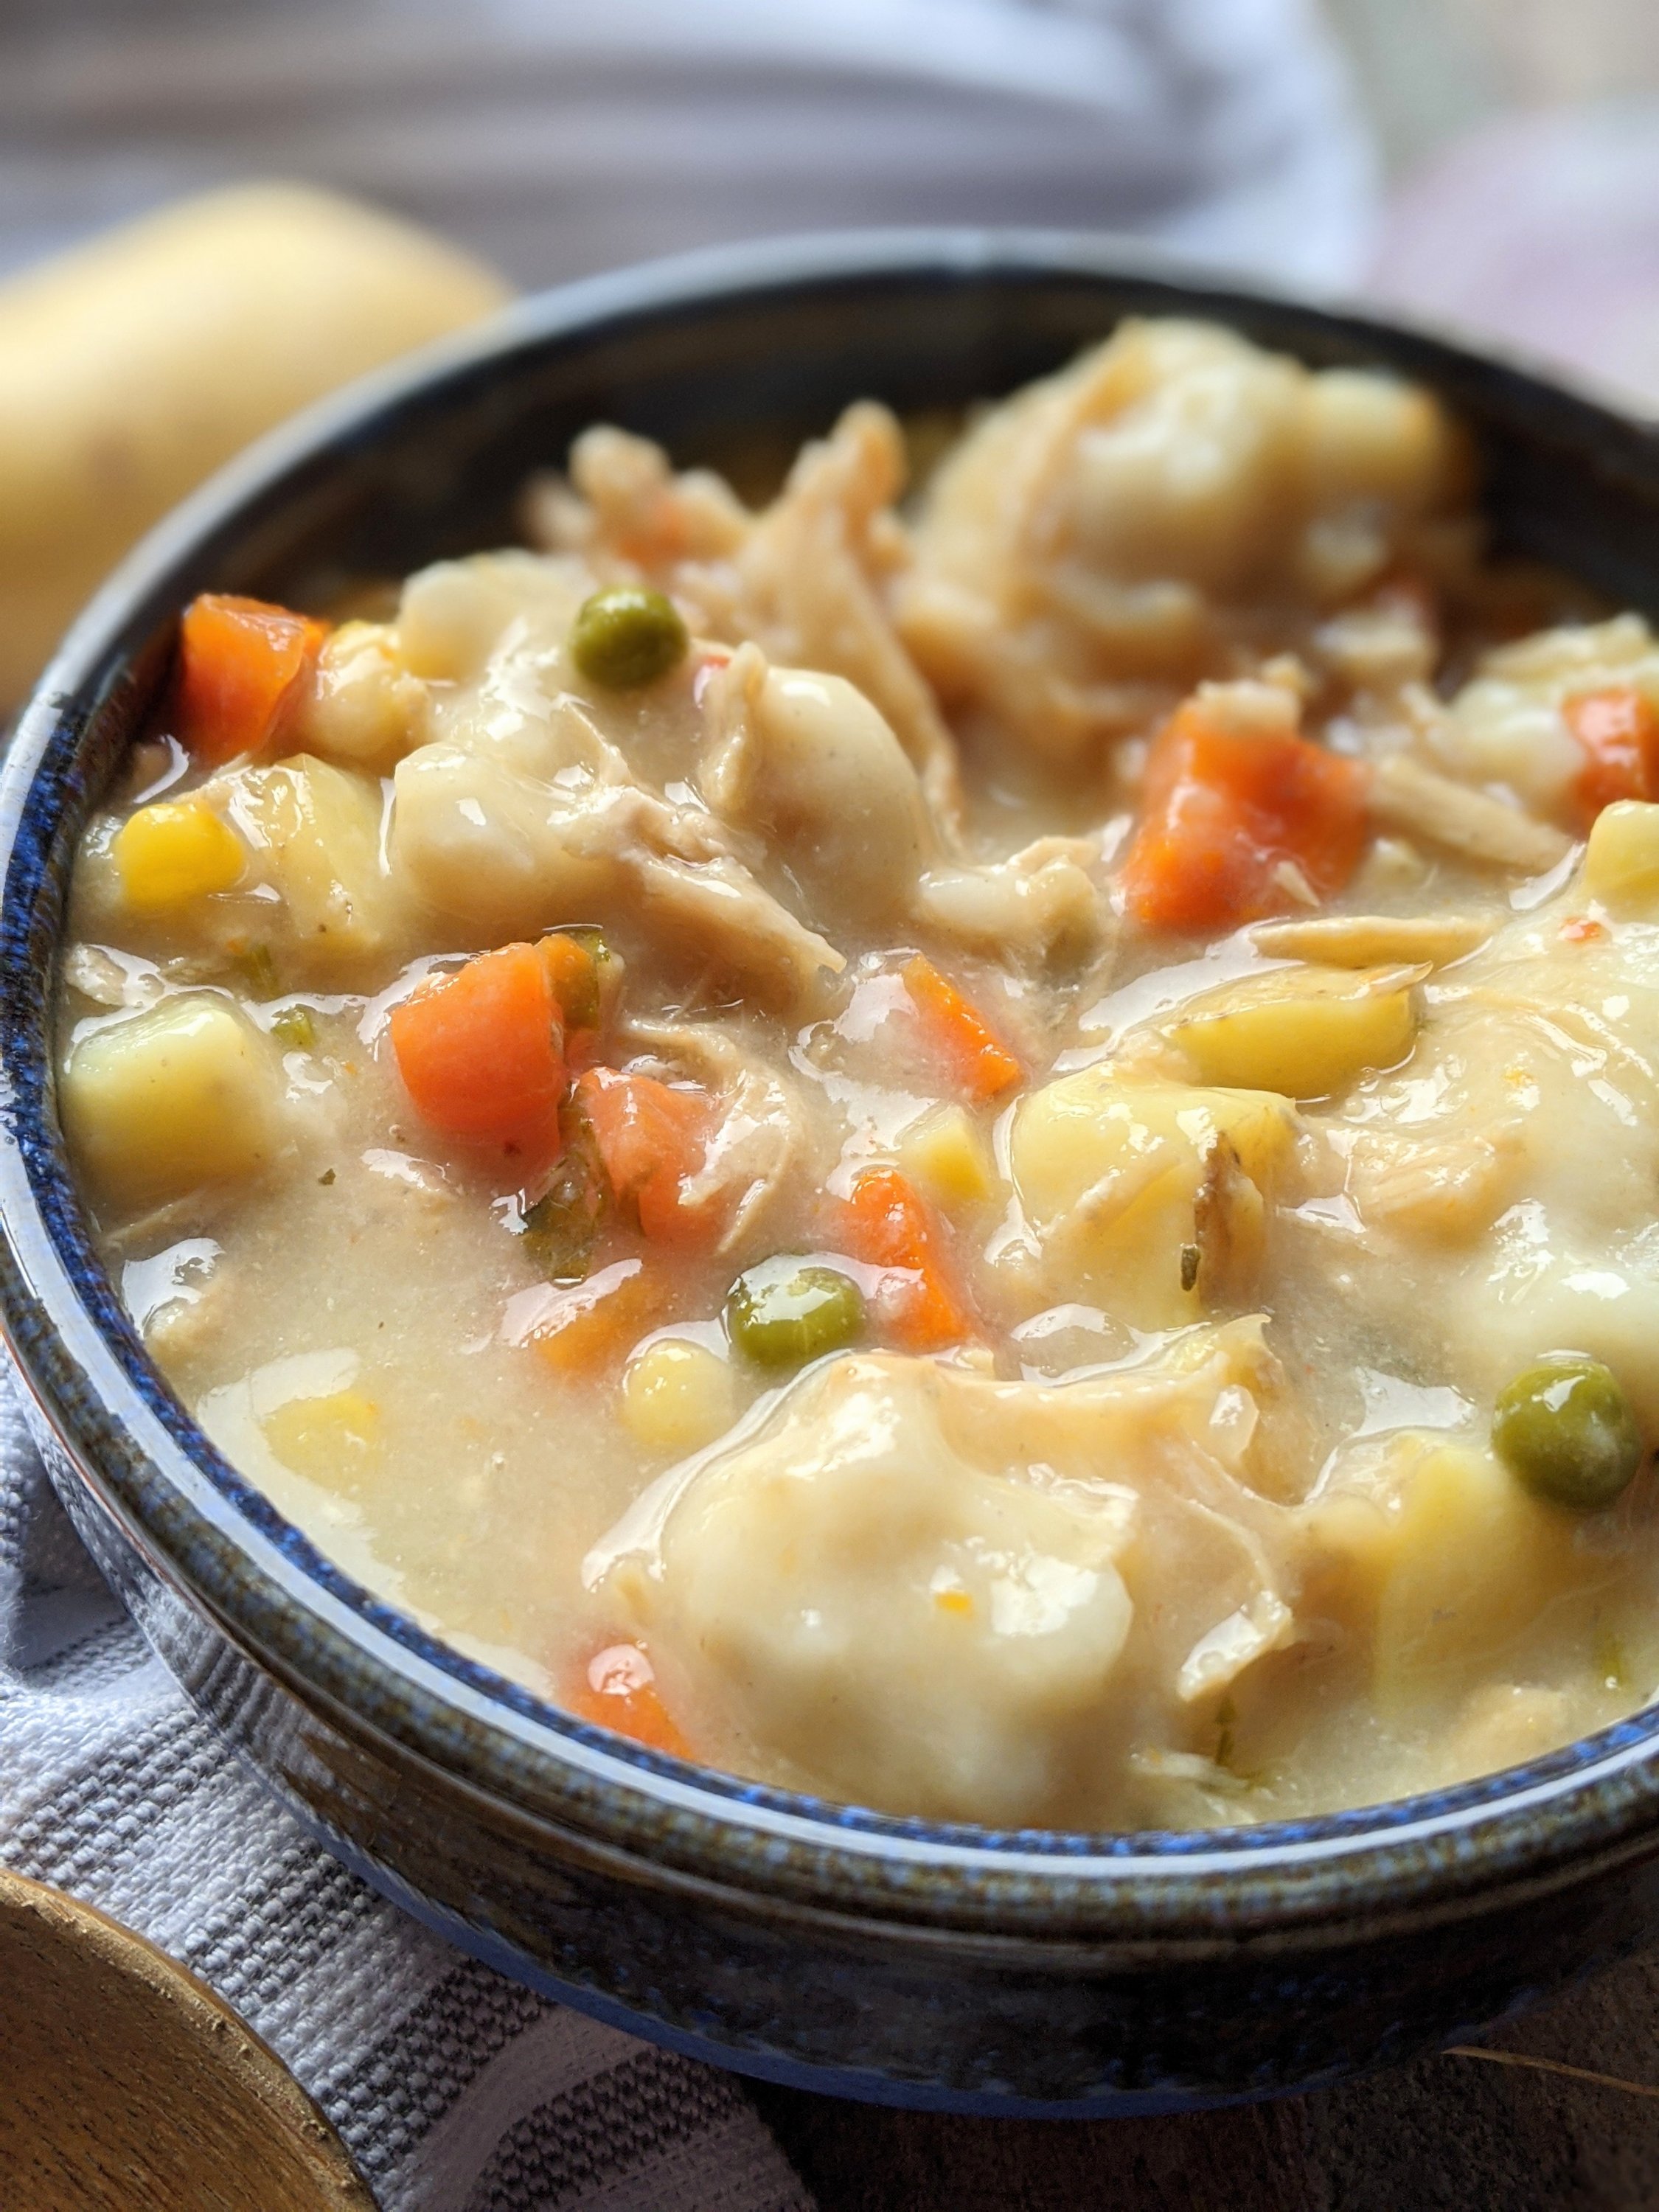 easy homemade chicken and dumplings soup recipe dutch oven cooking easy to meal prep for lunches or dinner recipes